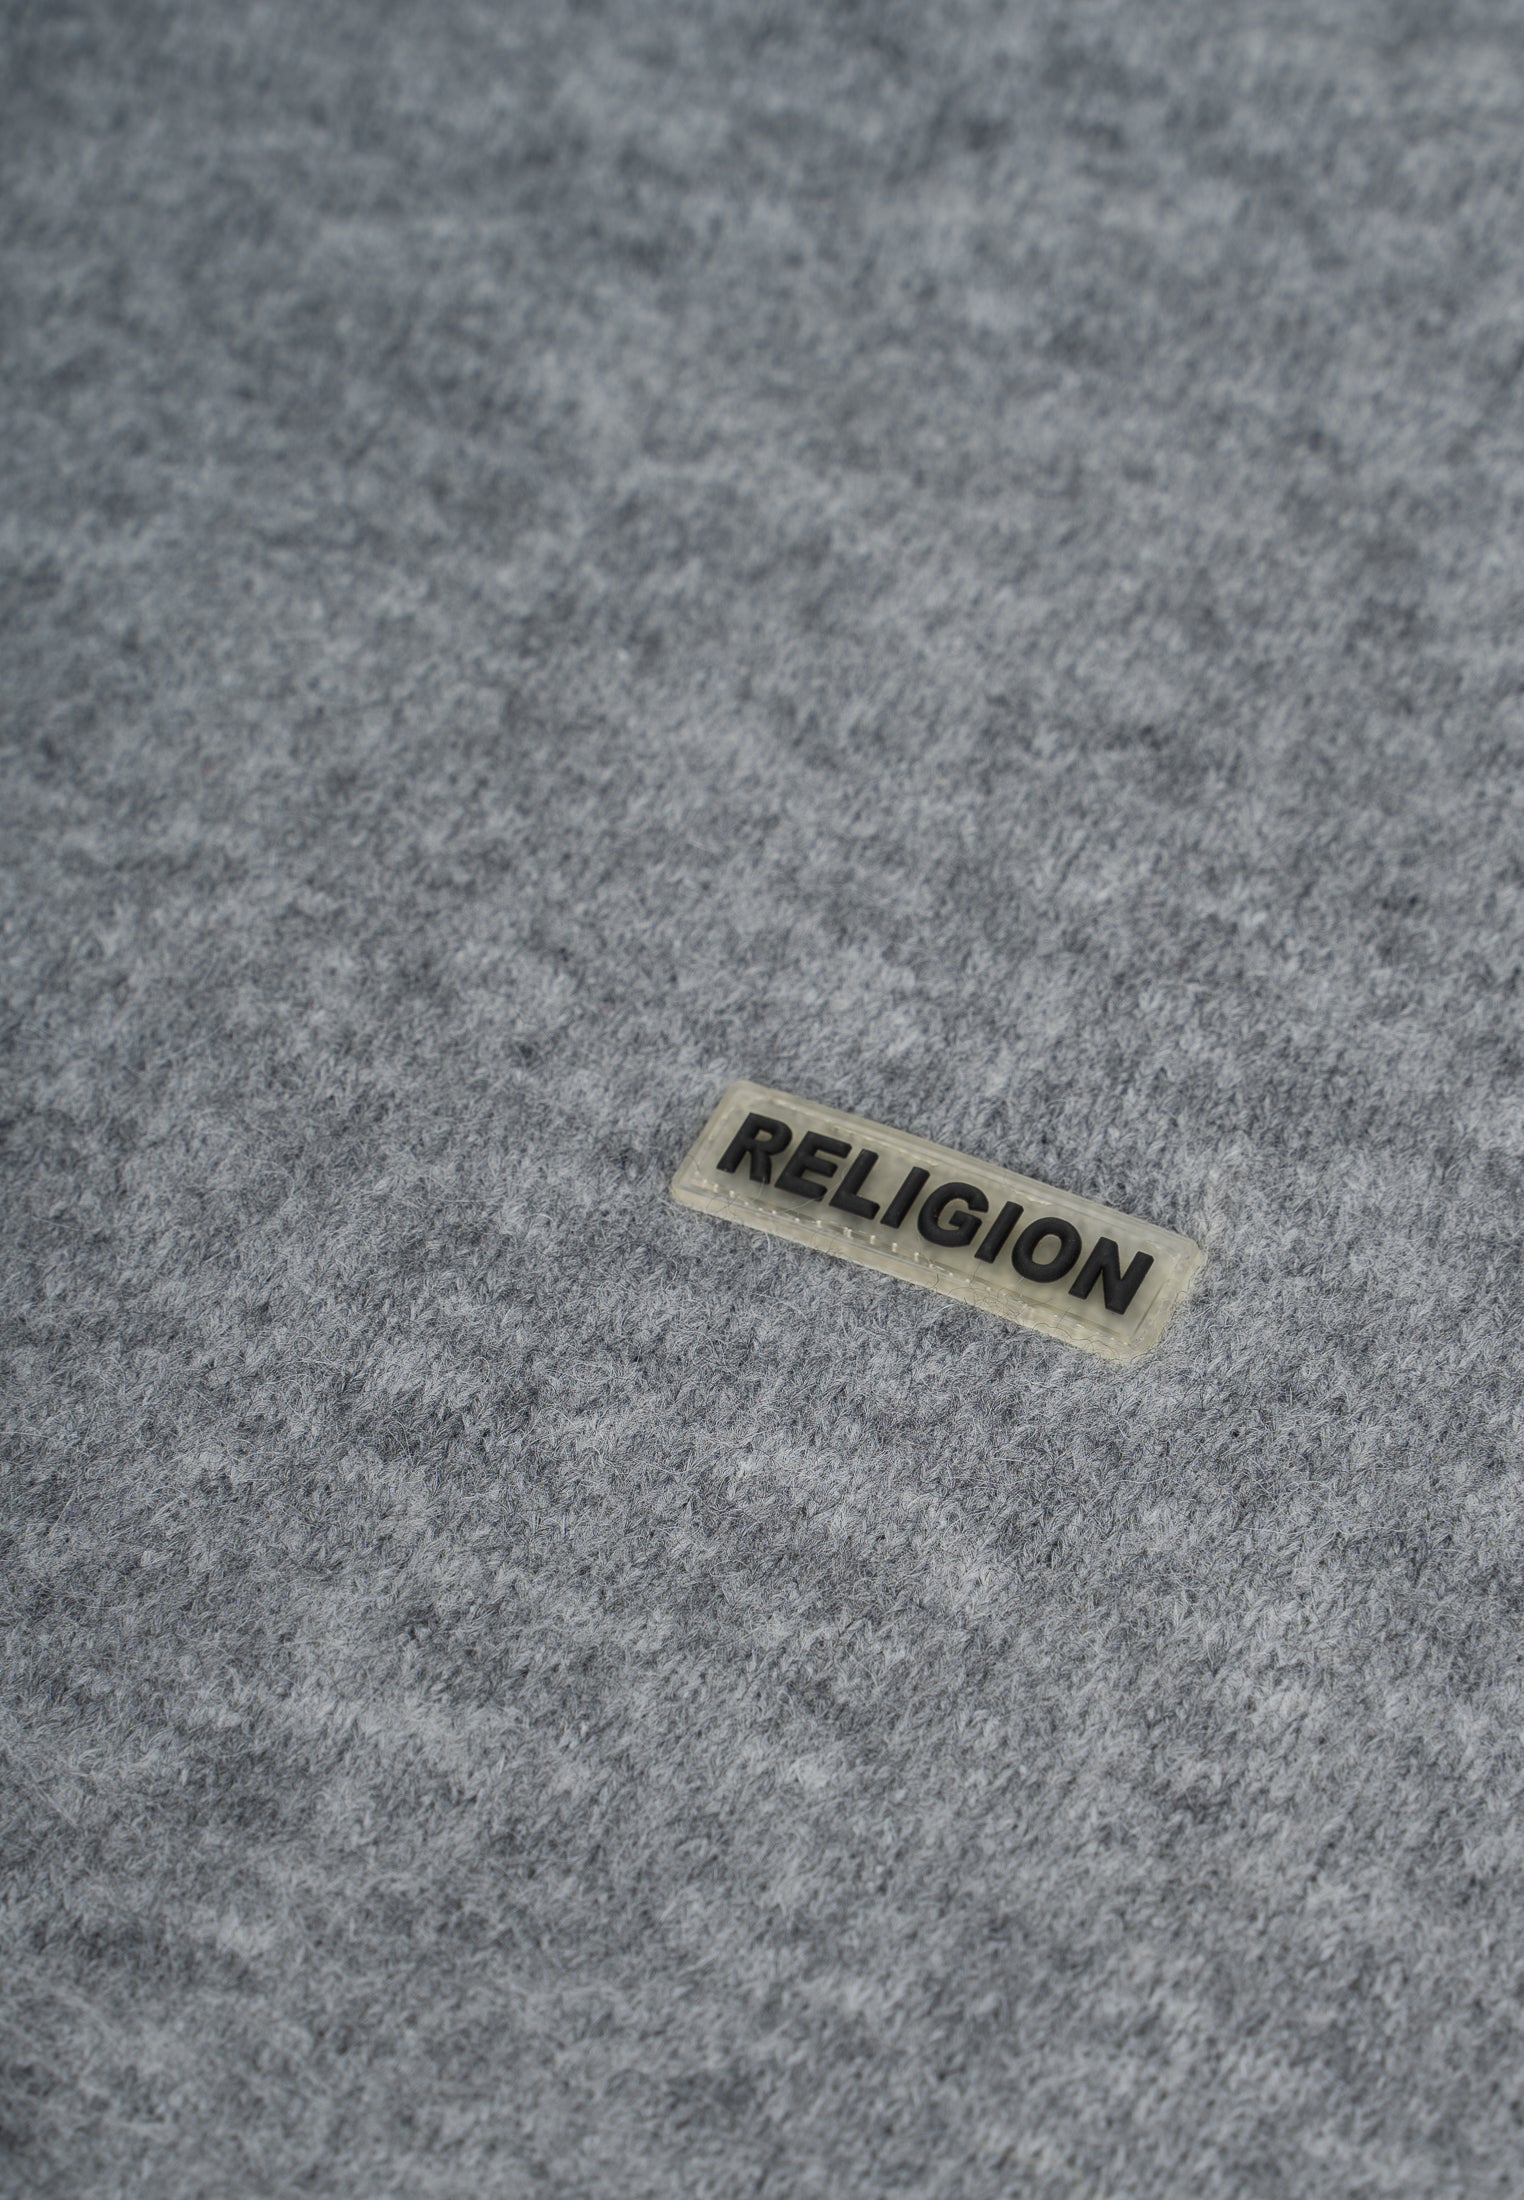 RELIGION Lad Oversized Fit Grey Knit